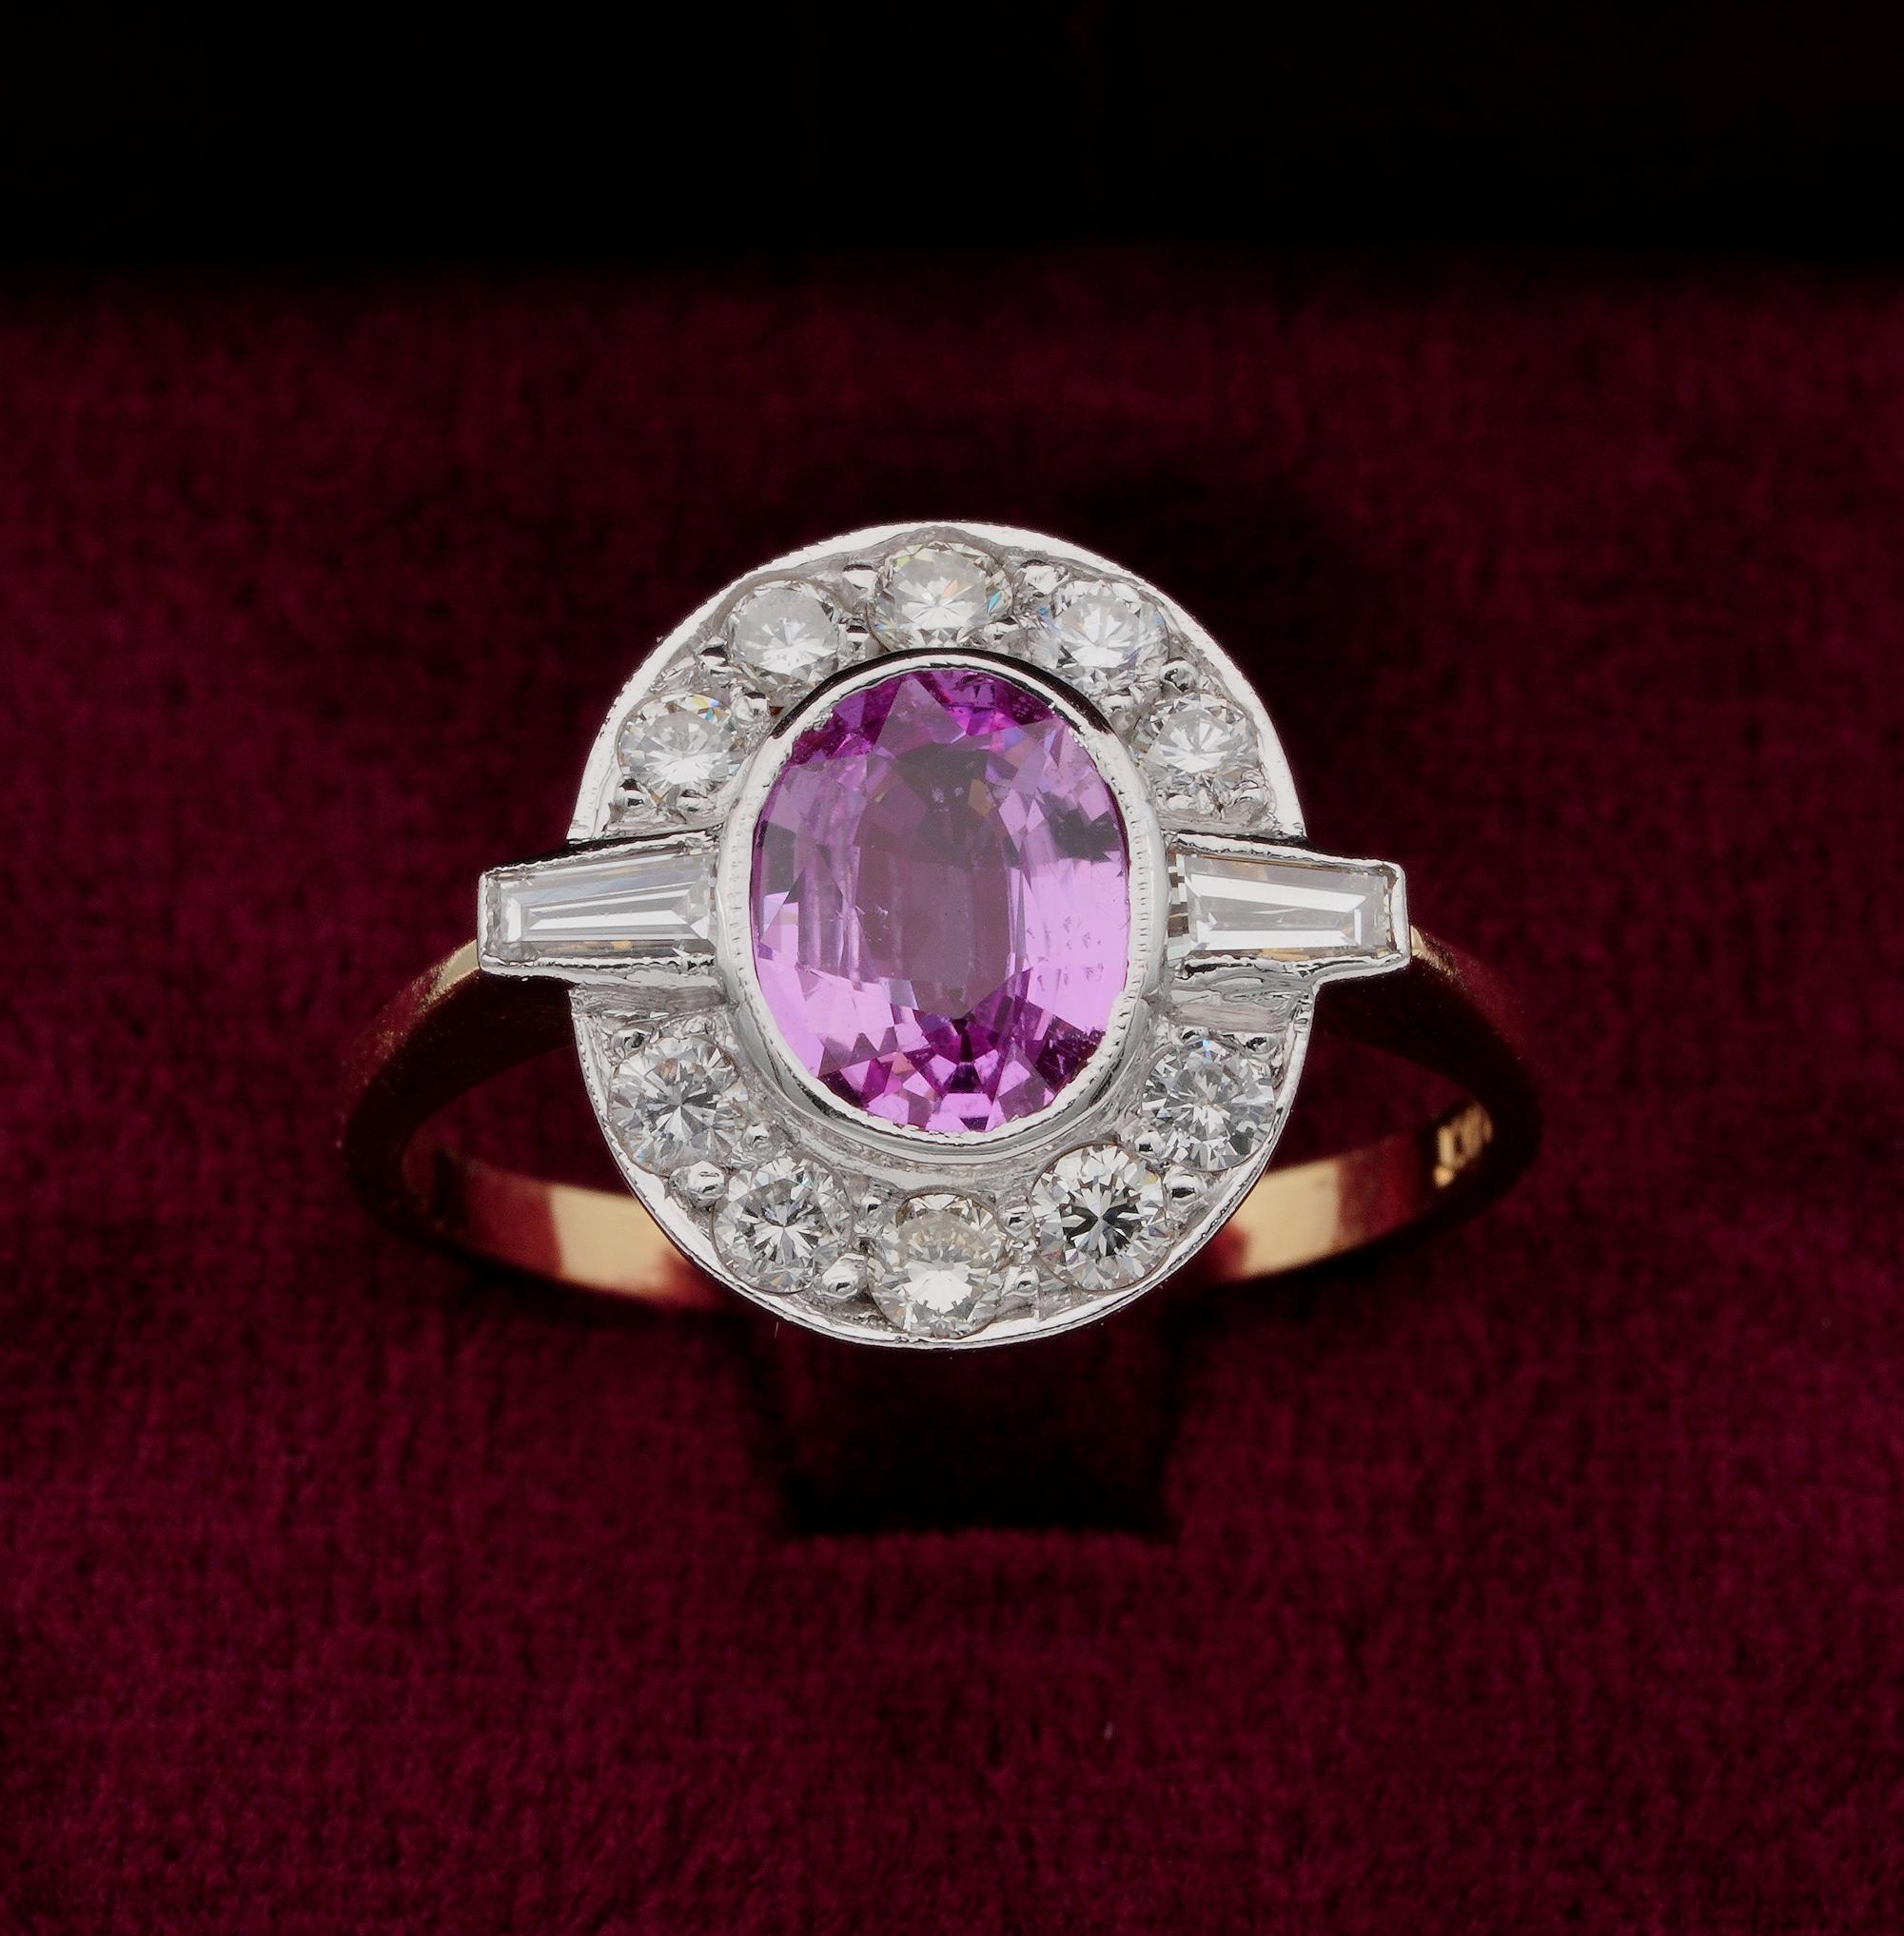 Sweet Ceylon Pink!
Gorgeous sleek design from the Art Deco period is this timeless ring dating 1930 ca
Striking Platinum crown hosting wonderful mother nature gifts: a superb Natural NO HEAT Ceylon Sapphire of vibrant intense Pink with a border of